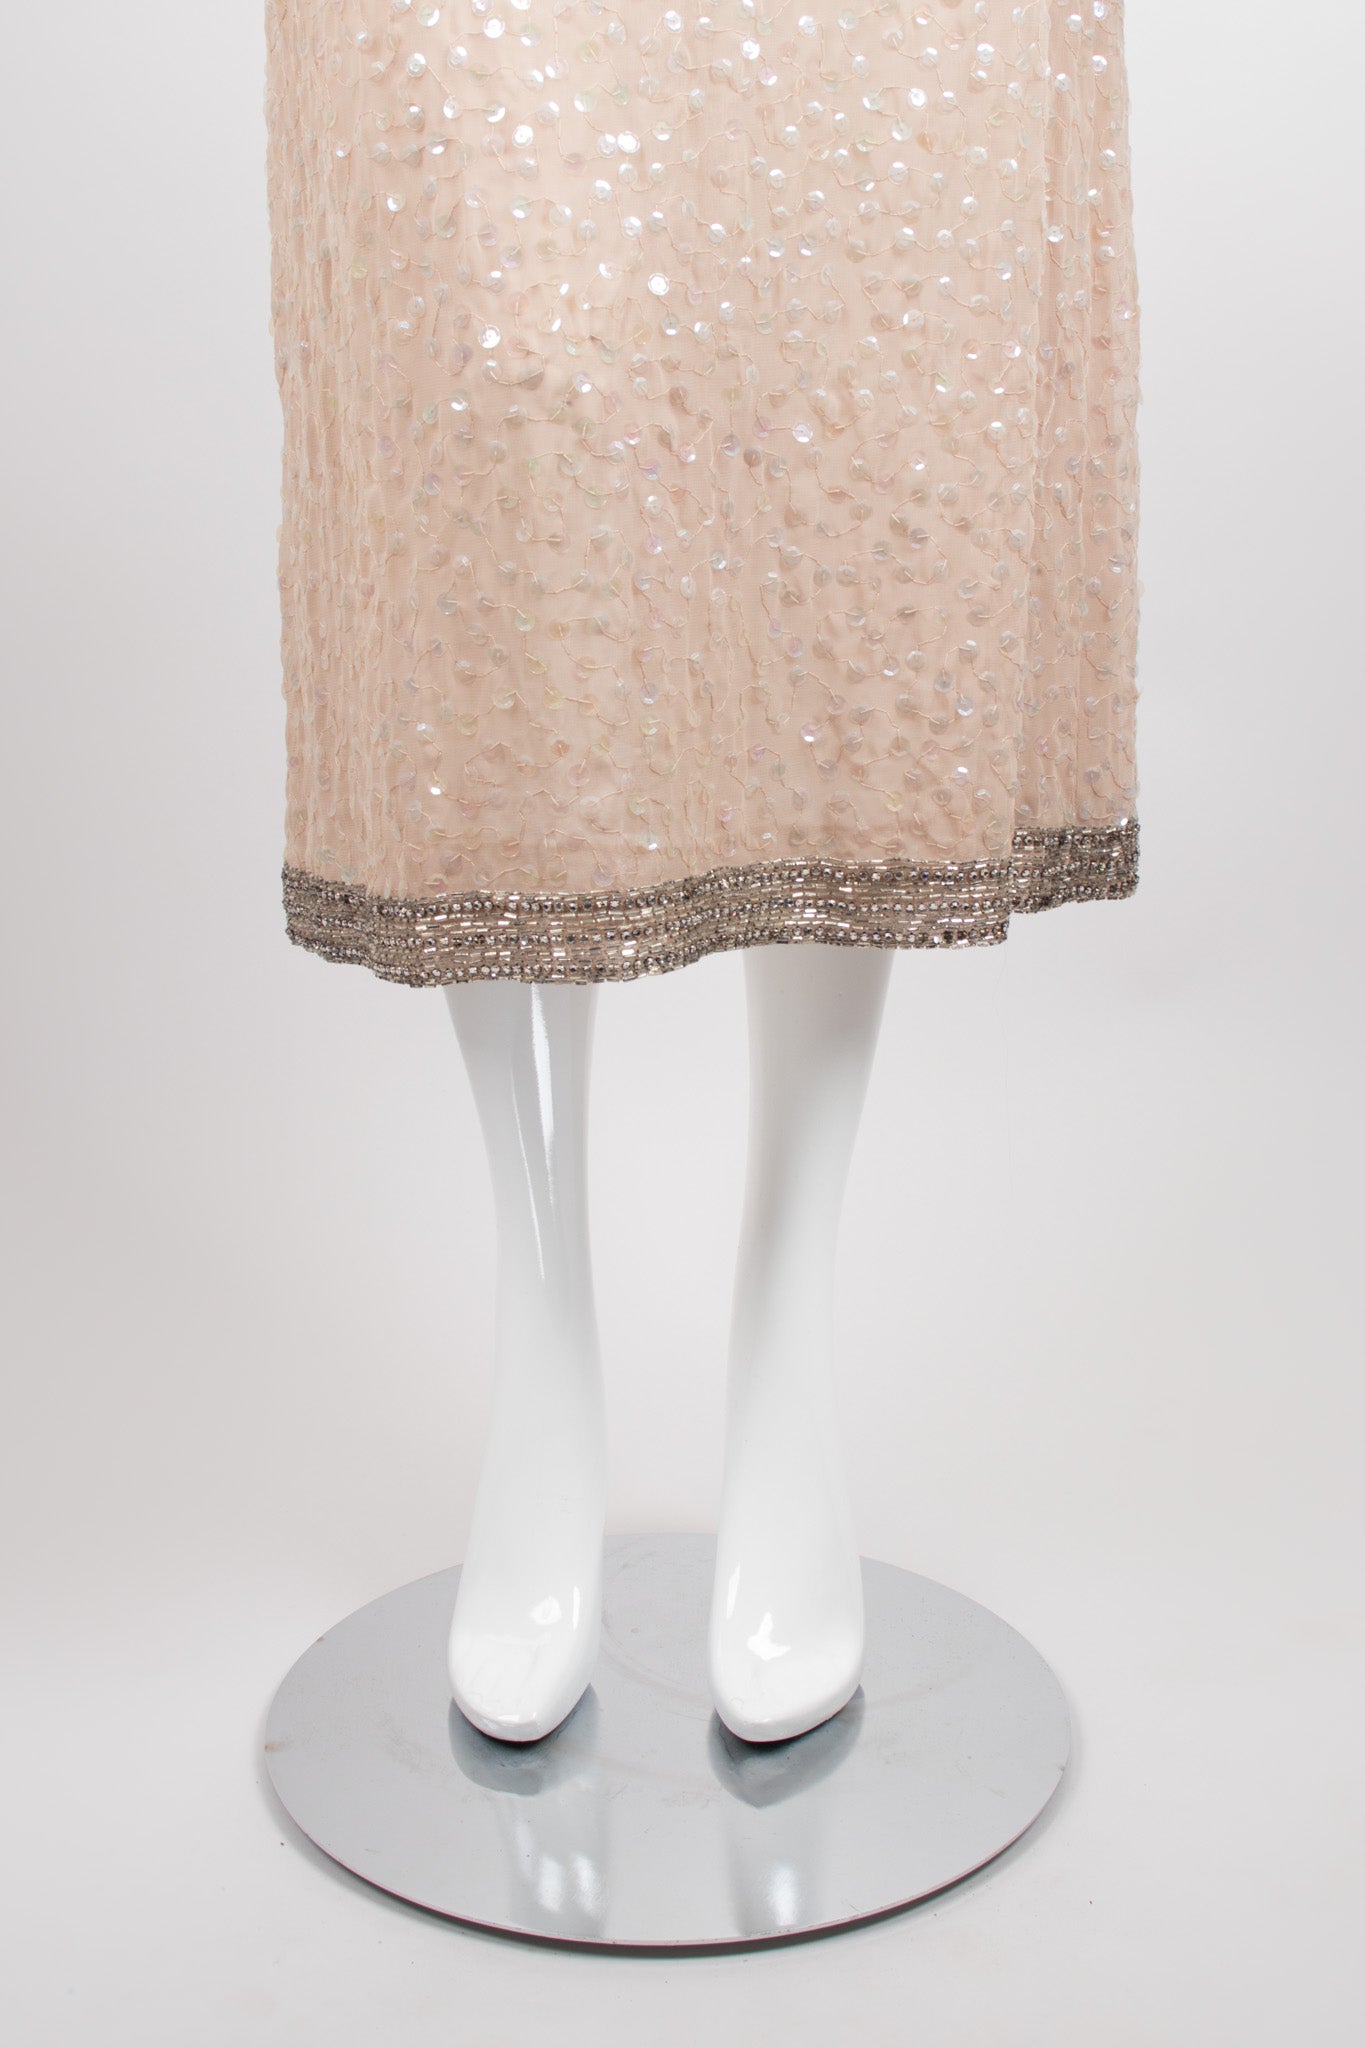 Mr. Blackwell Vintage Sheer Sequined Chiffon Nude Naked Dress